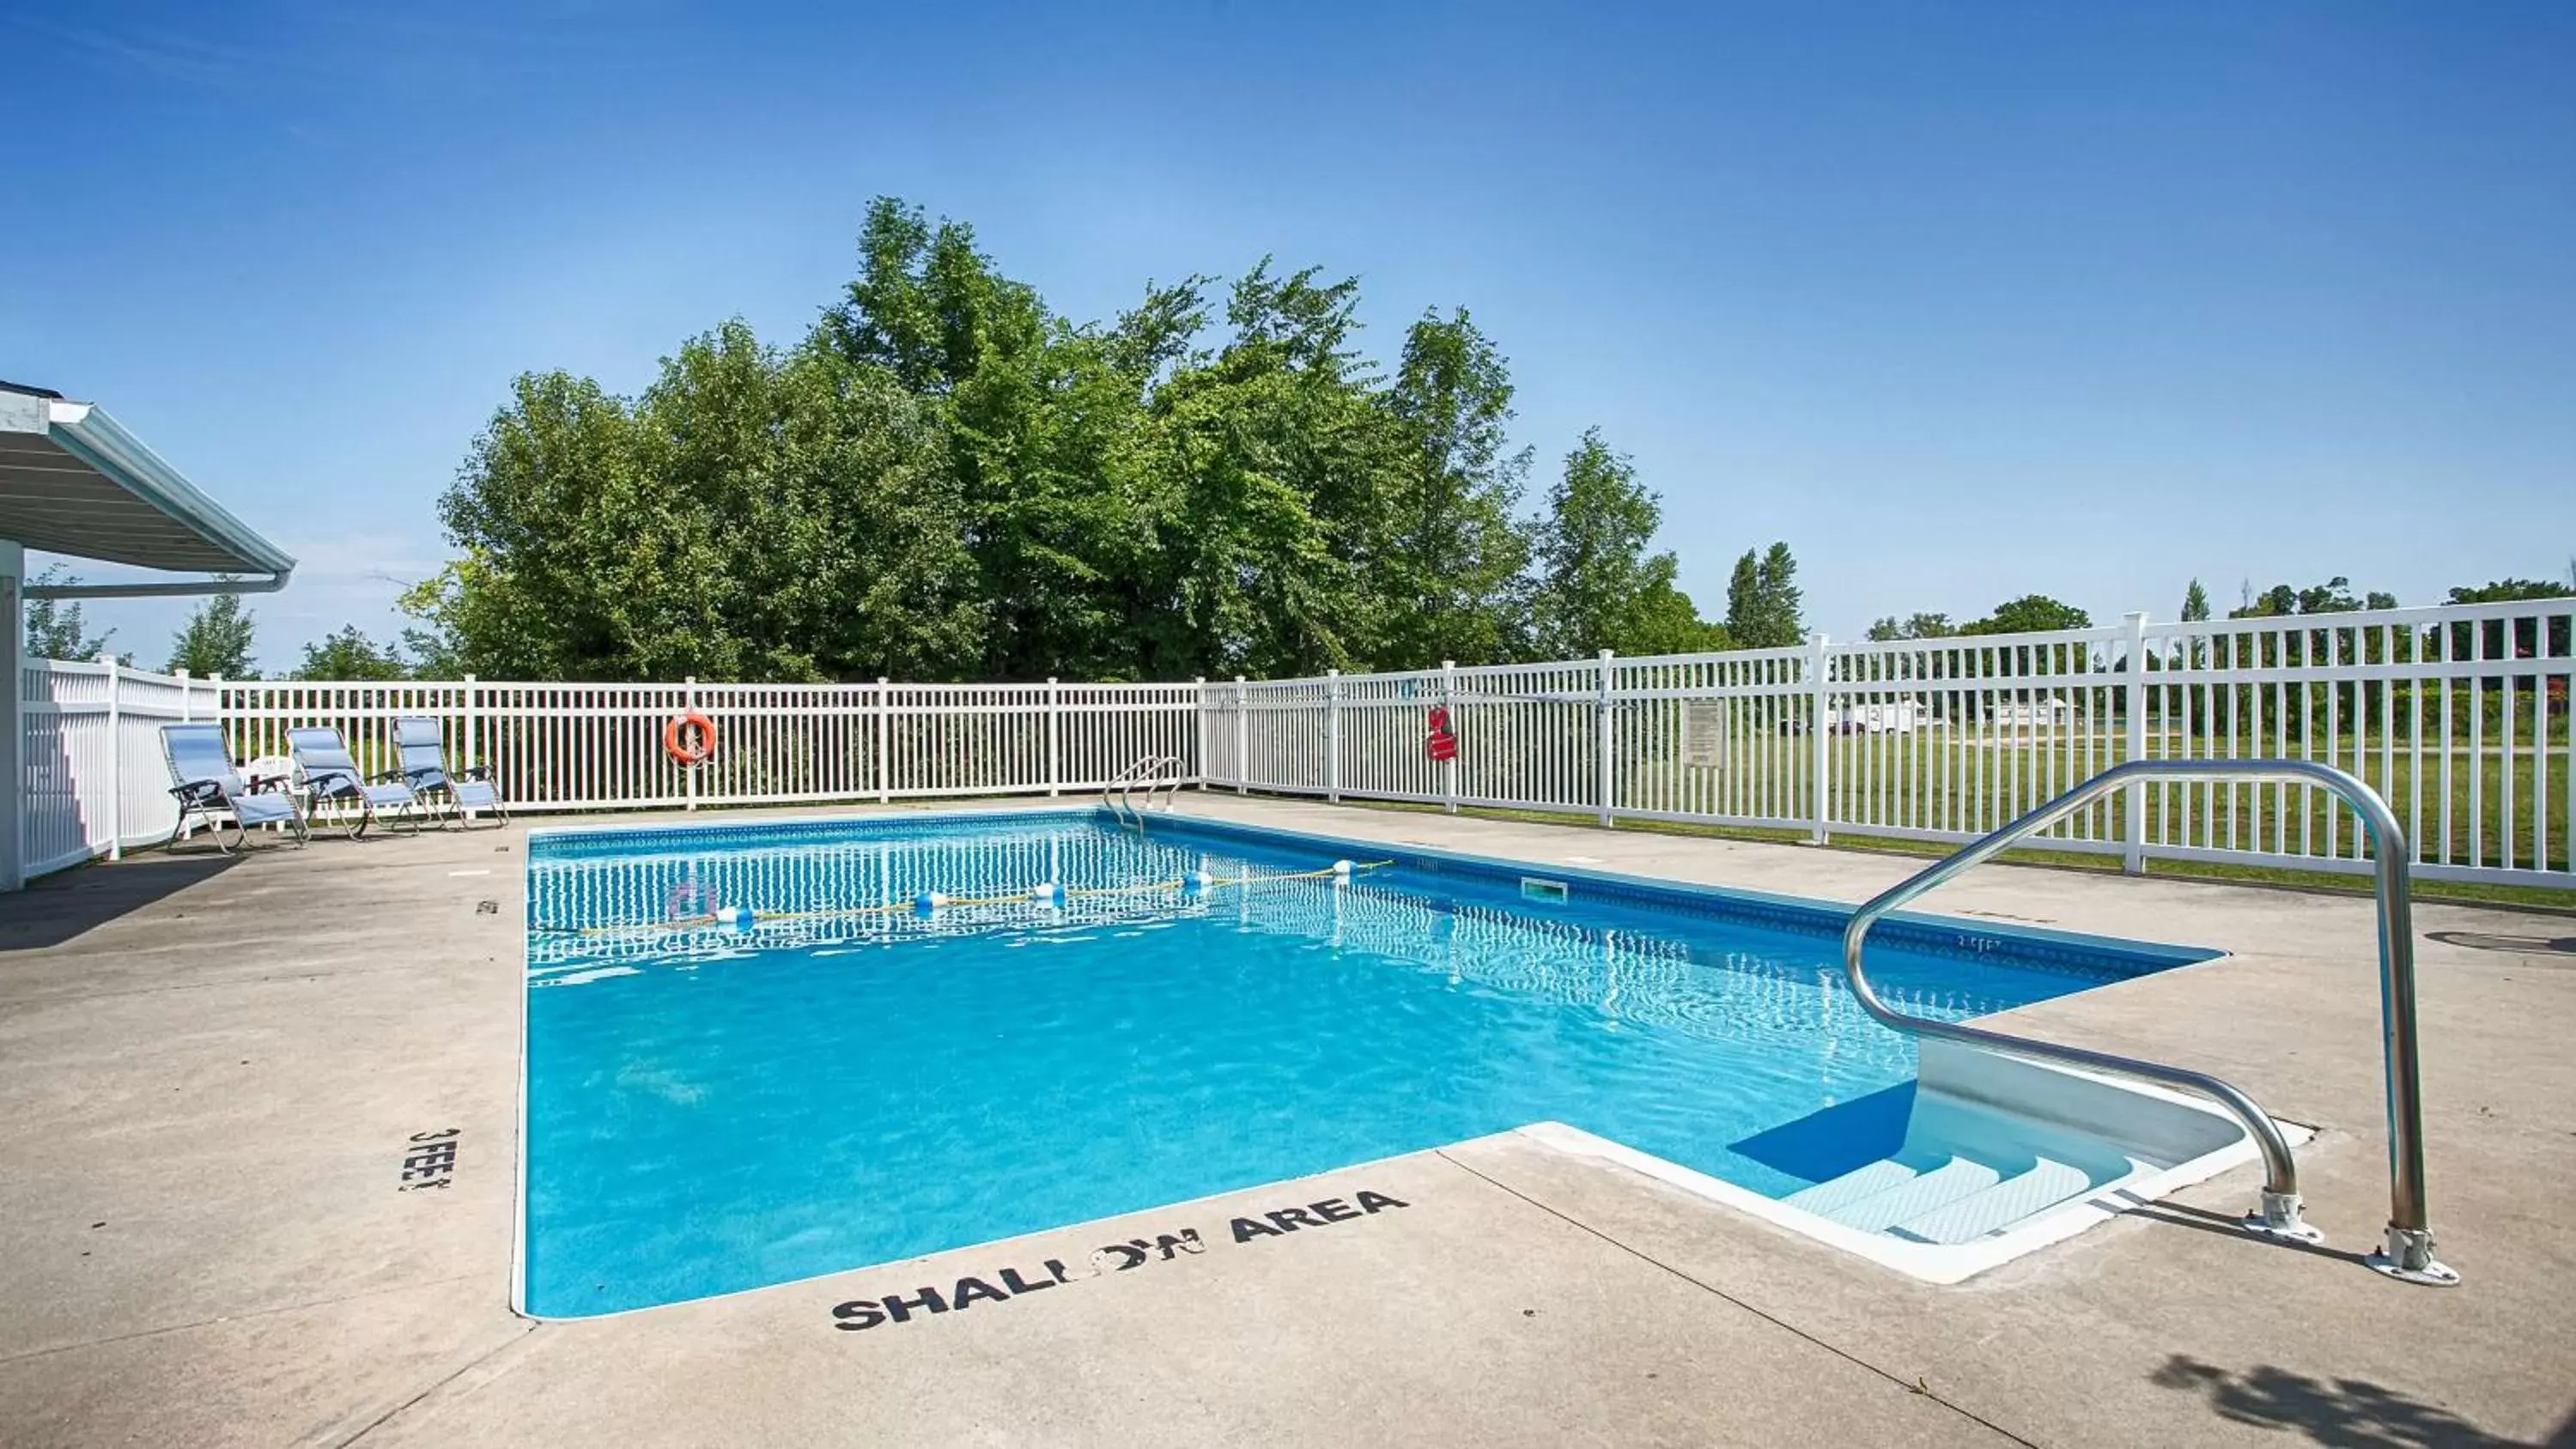 On site, Swimming Pool in Best Western Smiths Falls Hotel